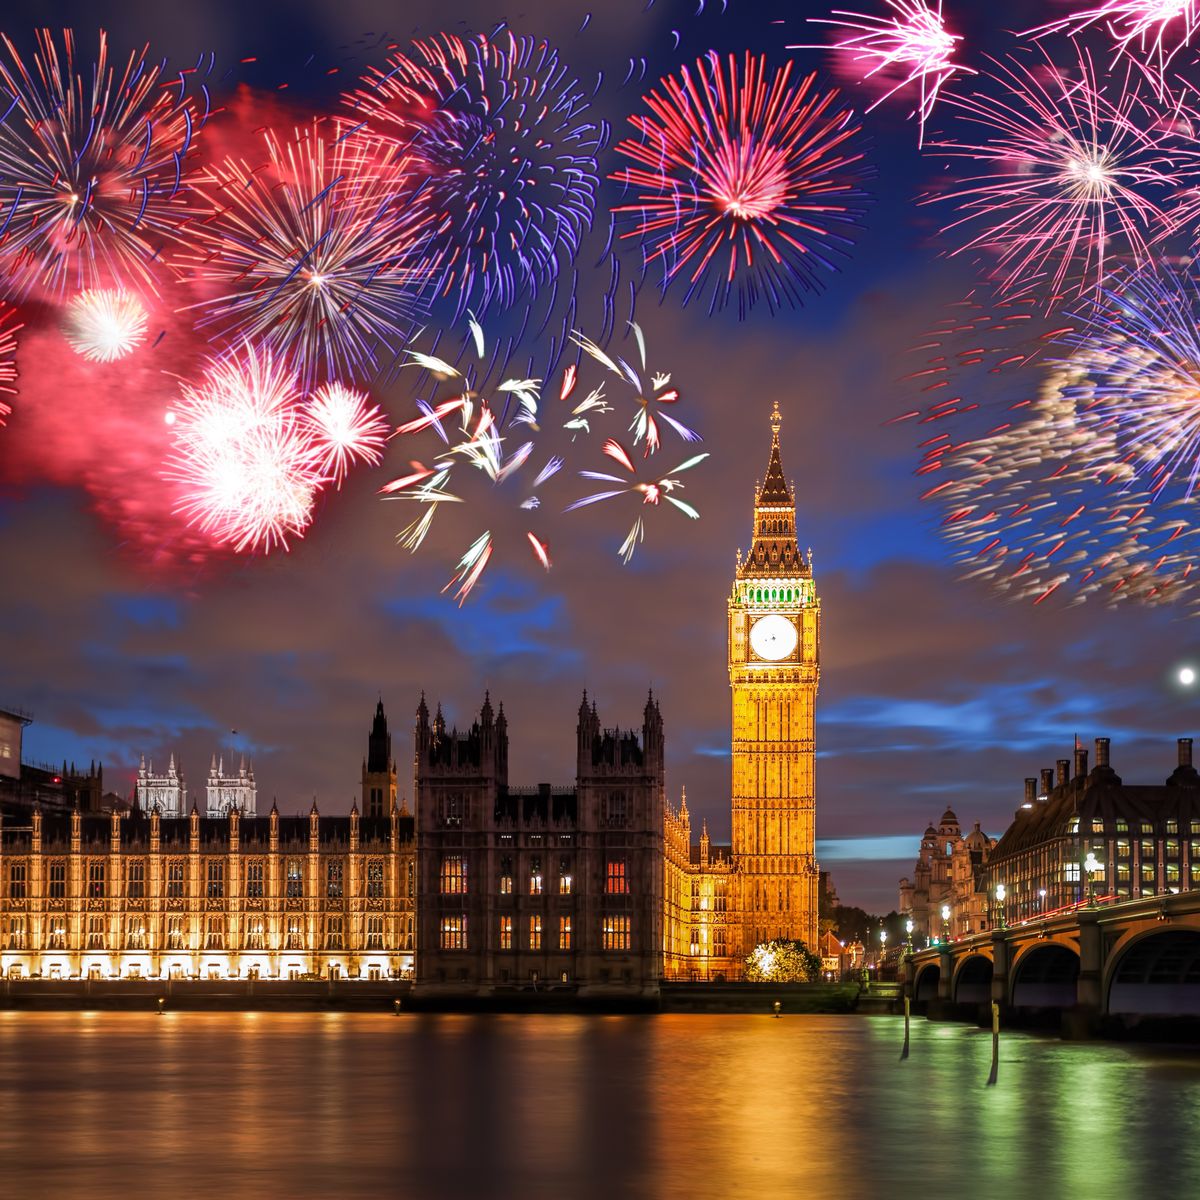 London Shows Its Support For Ukraine In The "New Year" Spectacular Fireworks Display